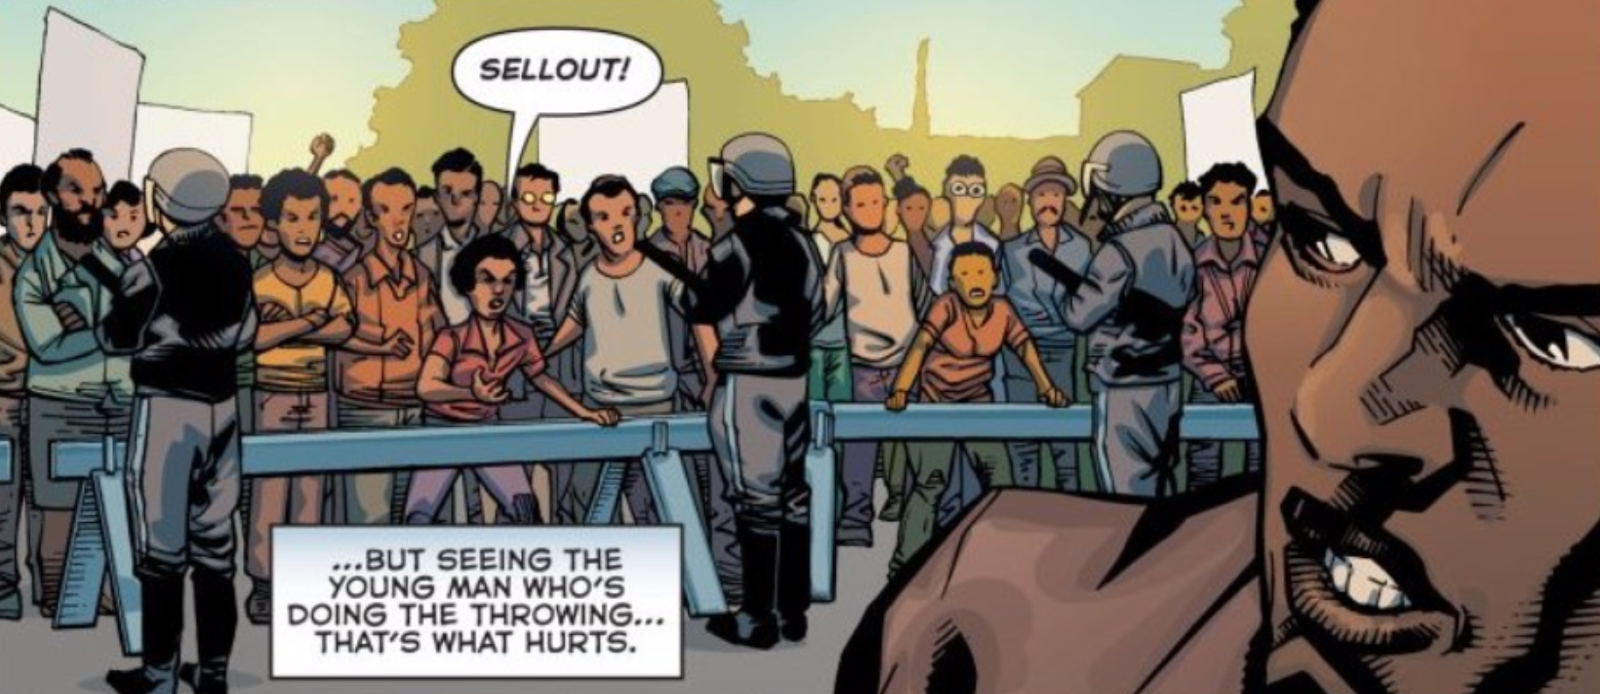 John Ridley Explains Why The Streets Are Burning In The Political Superhero Series The American Way